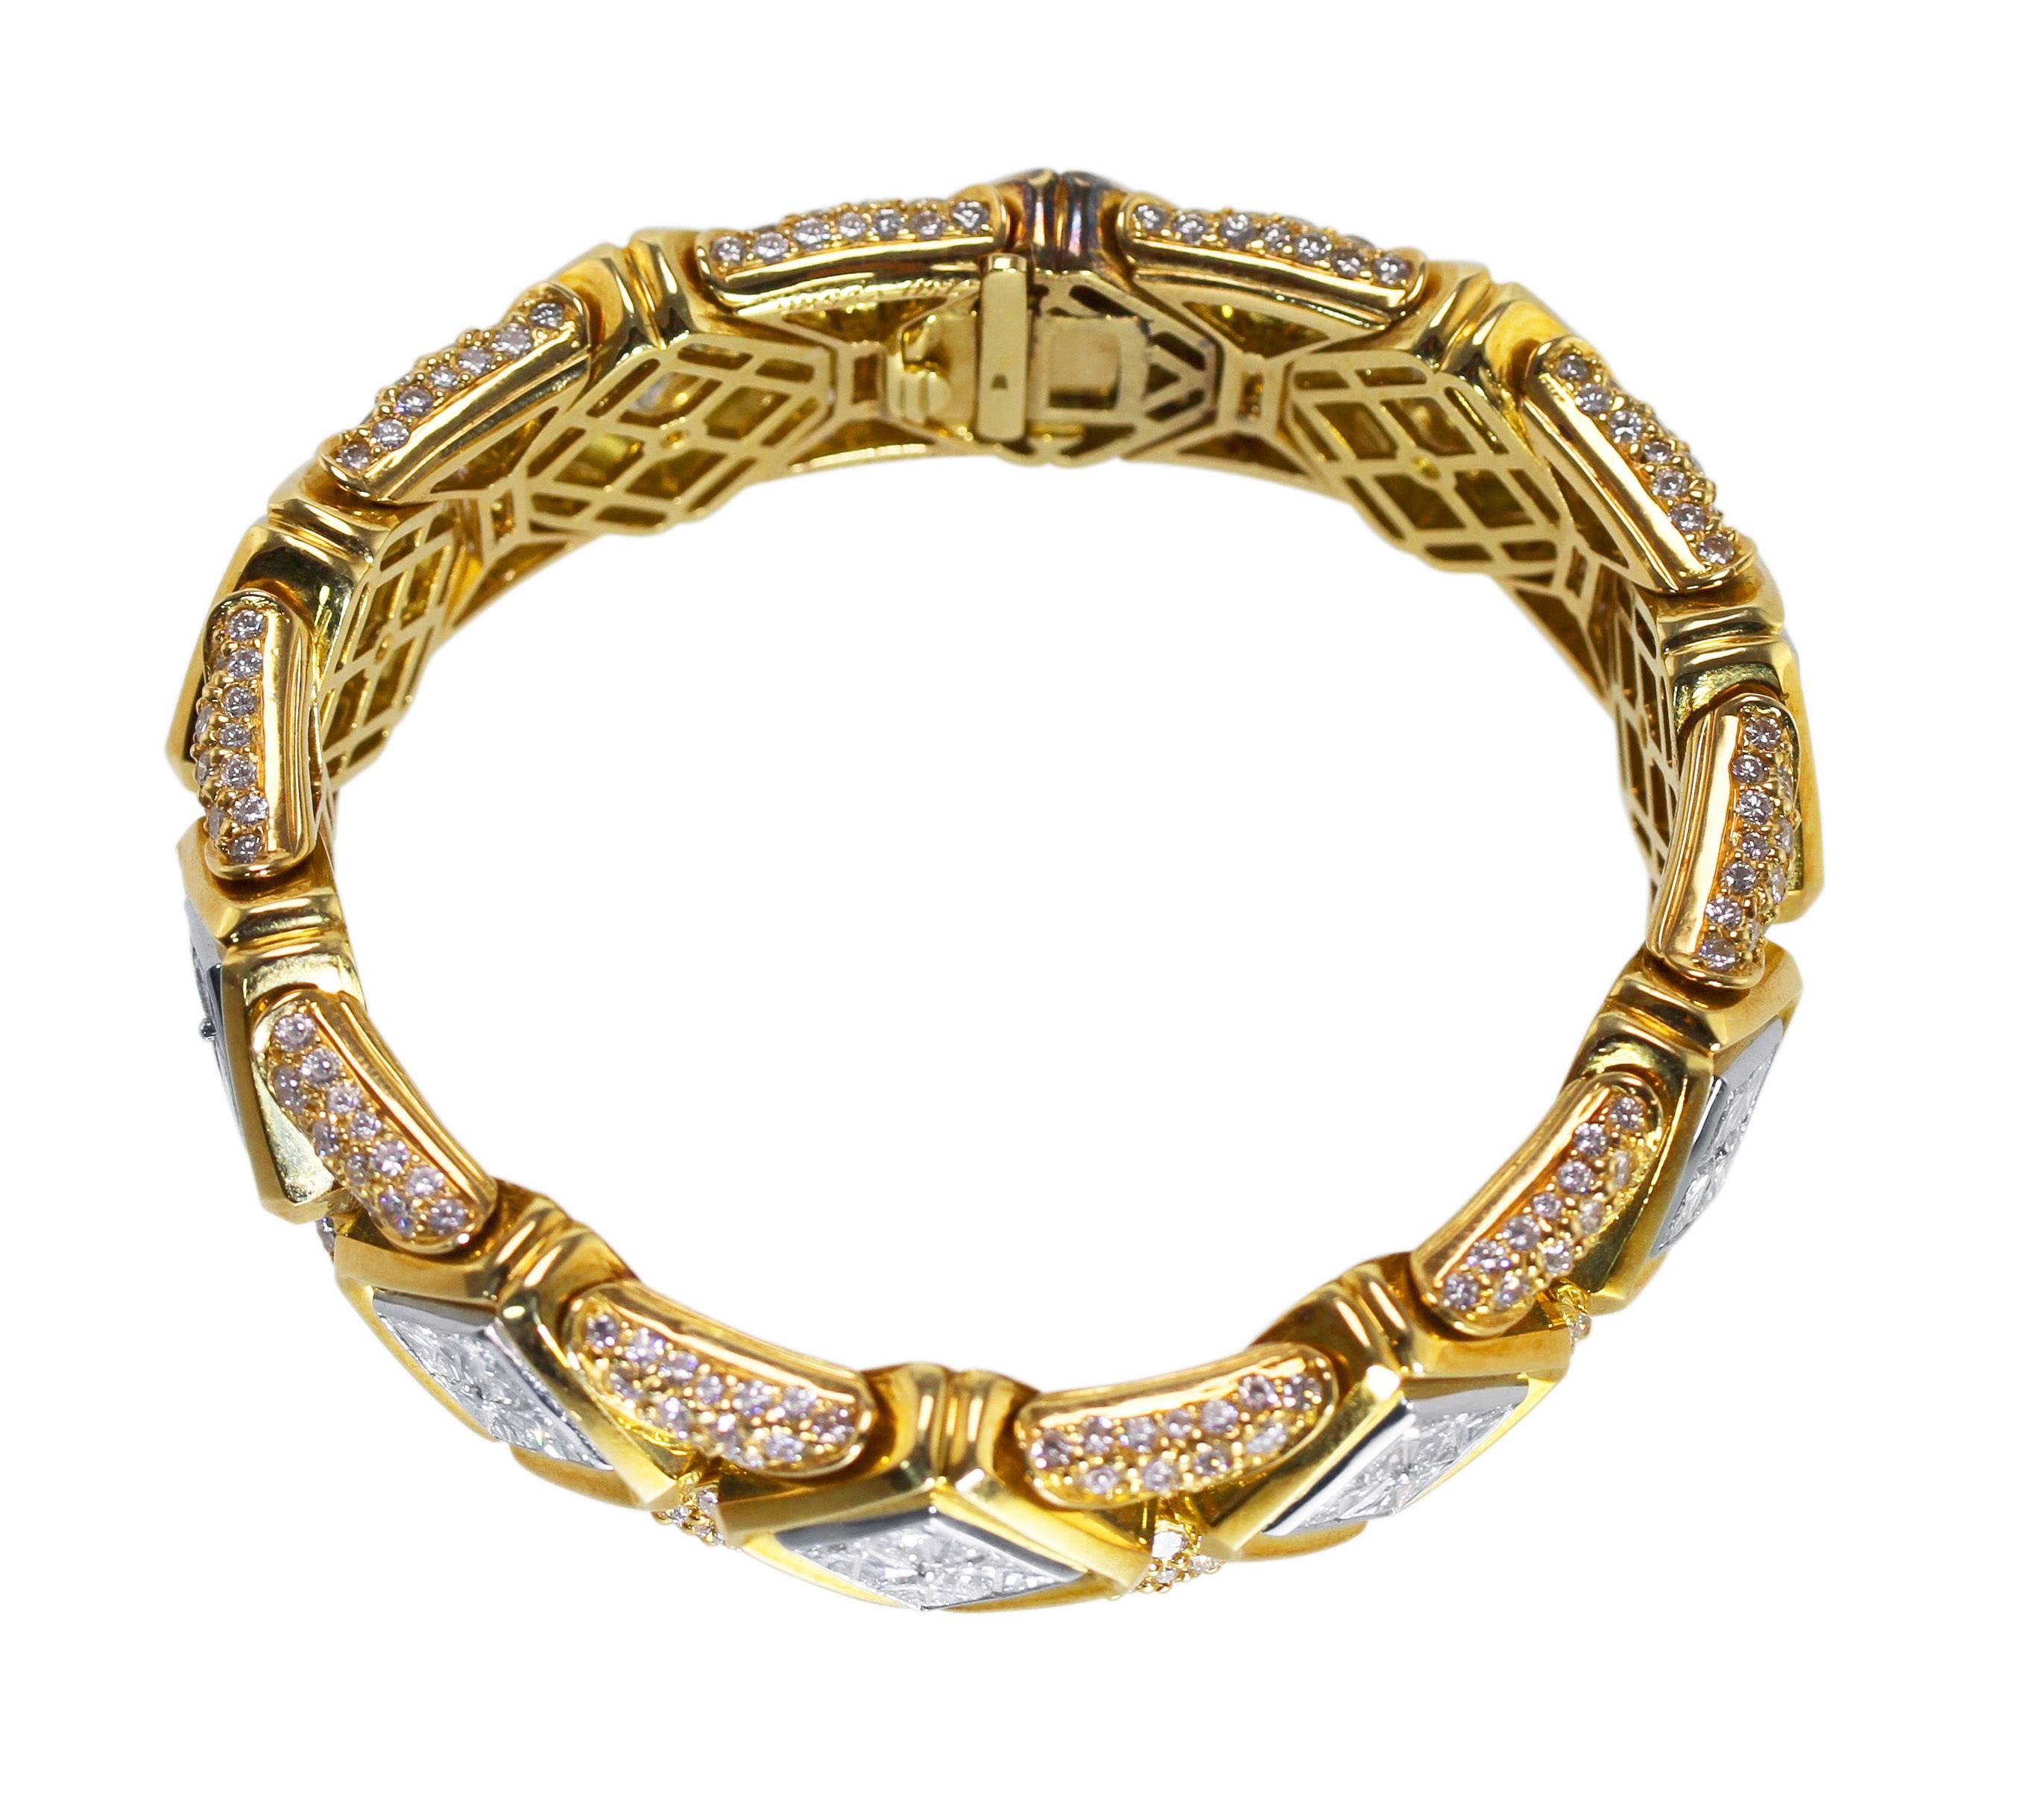 An 18 karat  yellow gold, platinum and diamond bracelet by Bulgari, Italy, designed as various square and rectangular plaques set with, the center ten plaques set with 40 princess-cut diamonds weighing approximately 18.00 carats, accented by 300